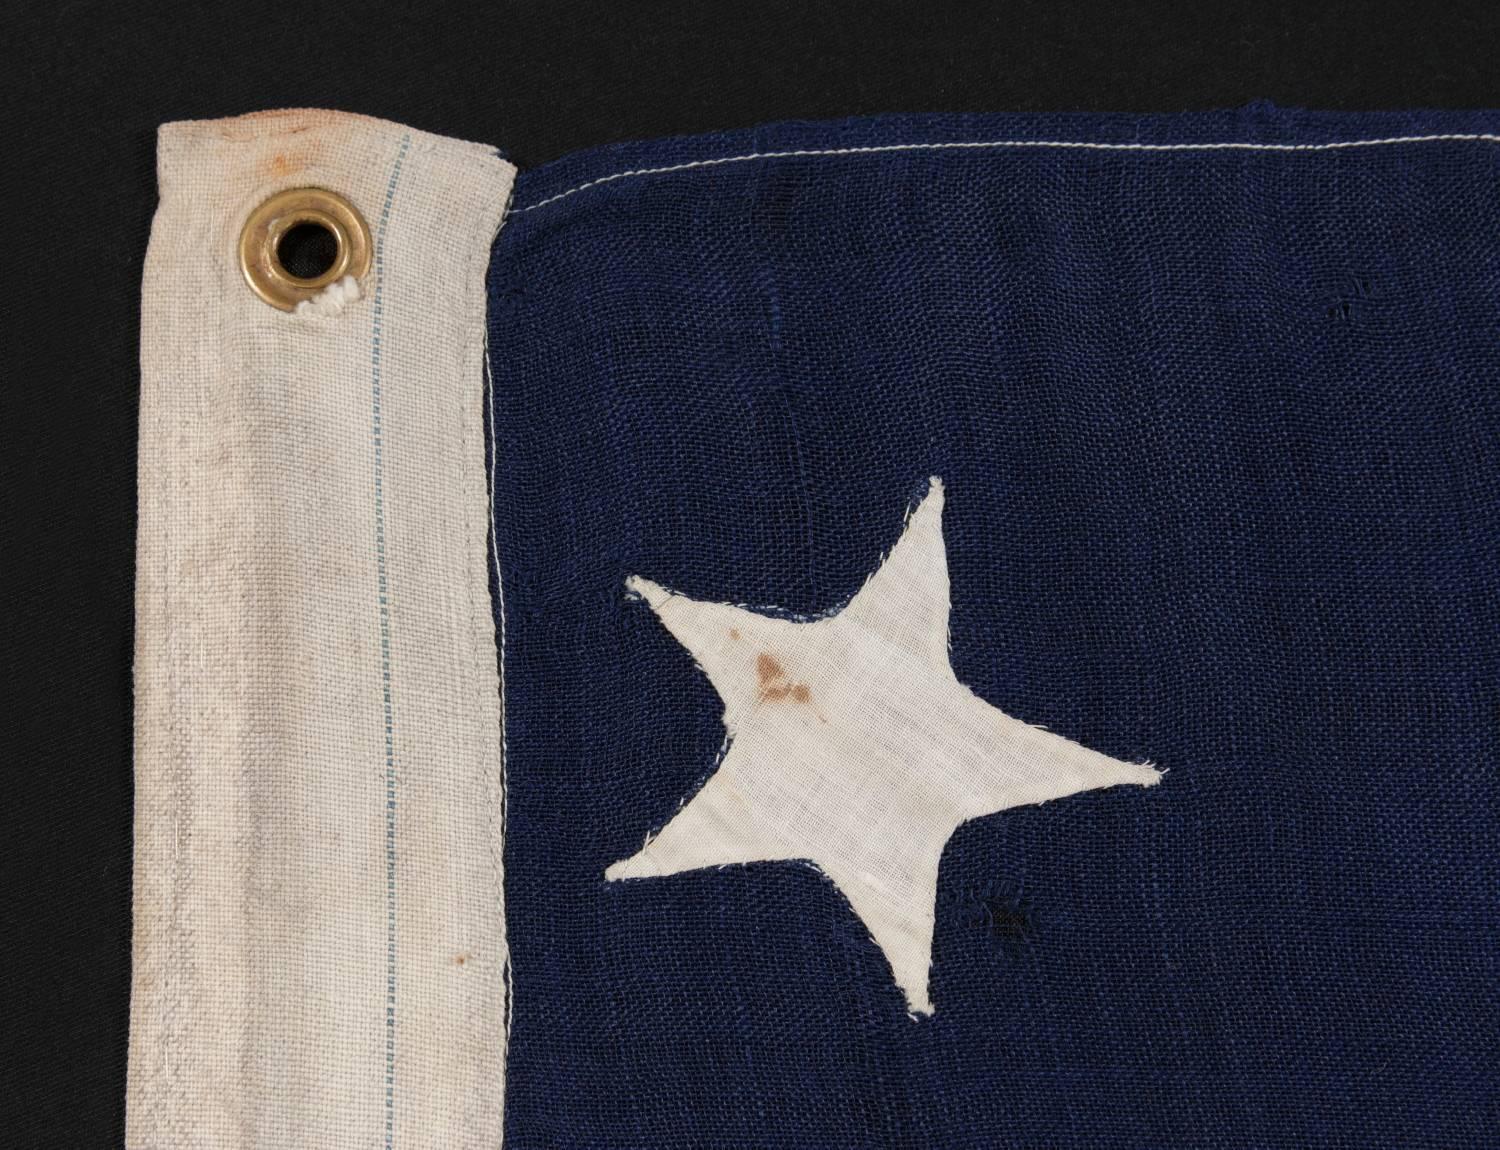 Late 19th Century 13 Hand-Sewn Stars on an Antique American Flag of the 1876 Era